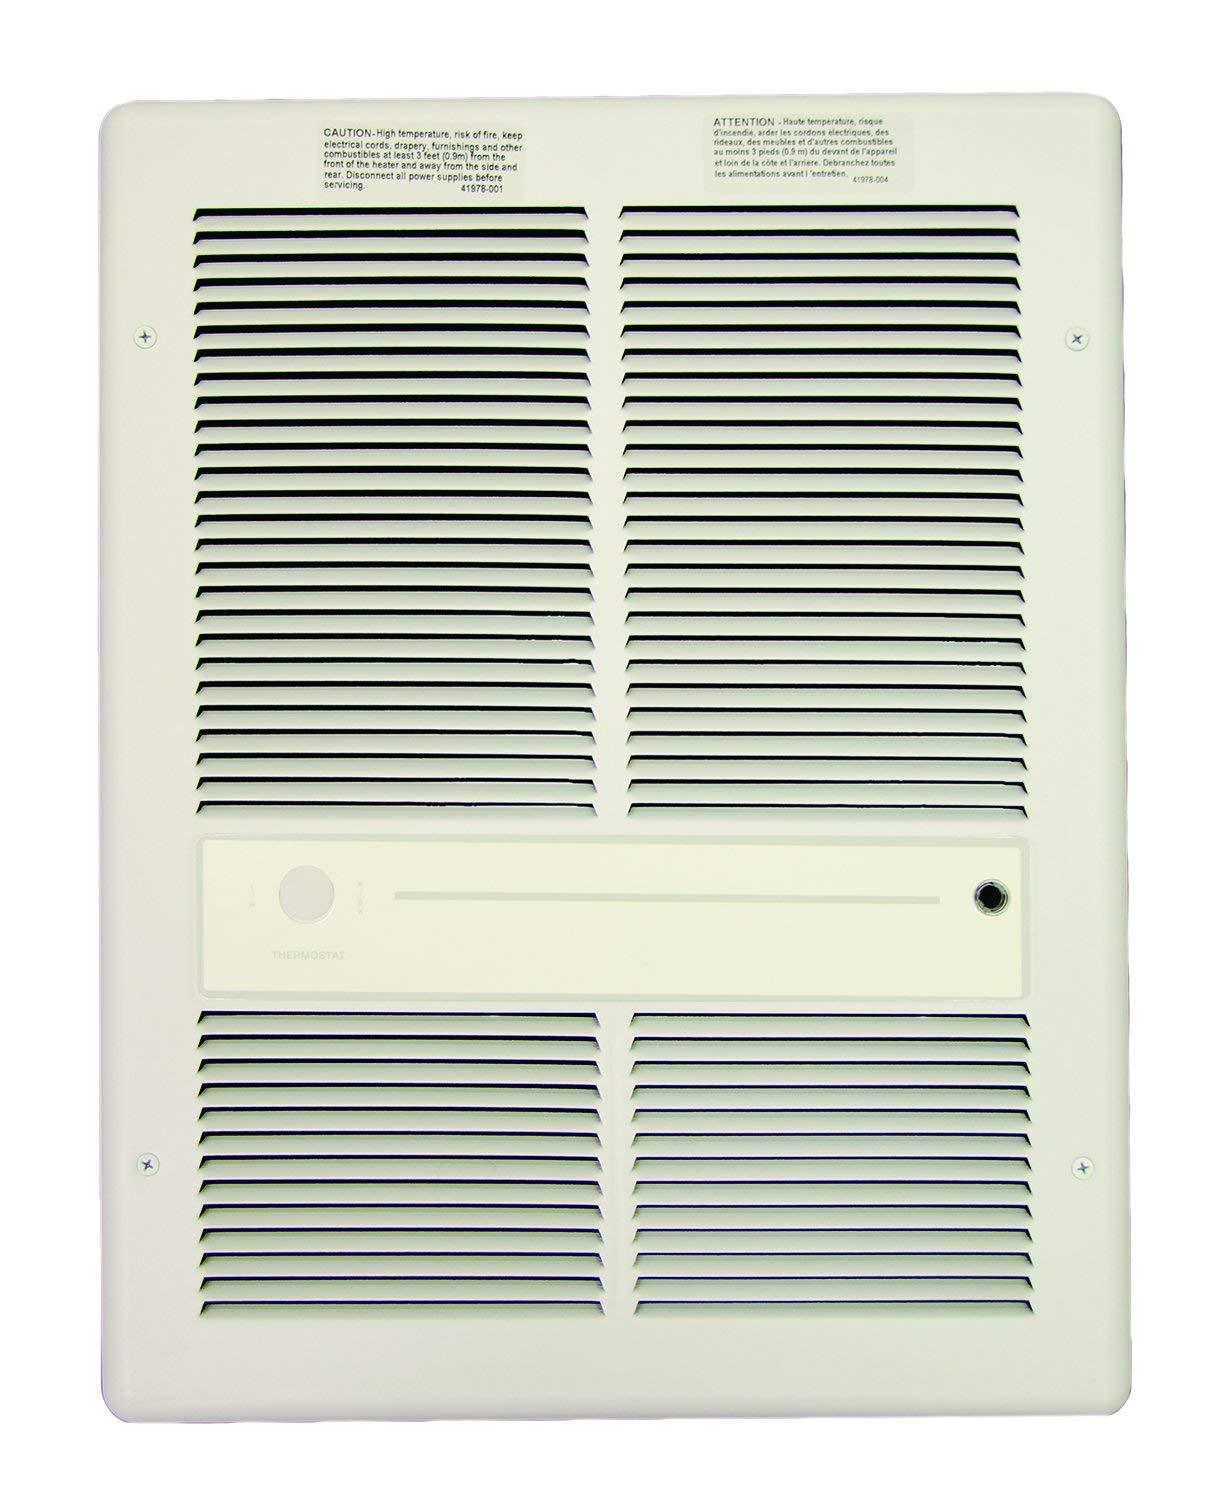 TPI 4000W 208V 3310 Series Fan Forced Wall Heater (White) - Without Summer Fan Switch - 1 Pole Thermostat - F3316TRPW